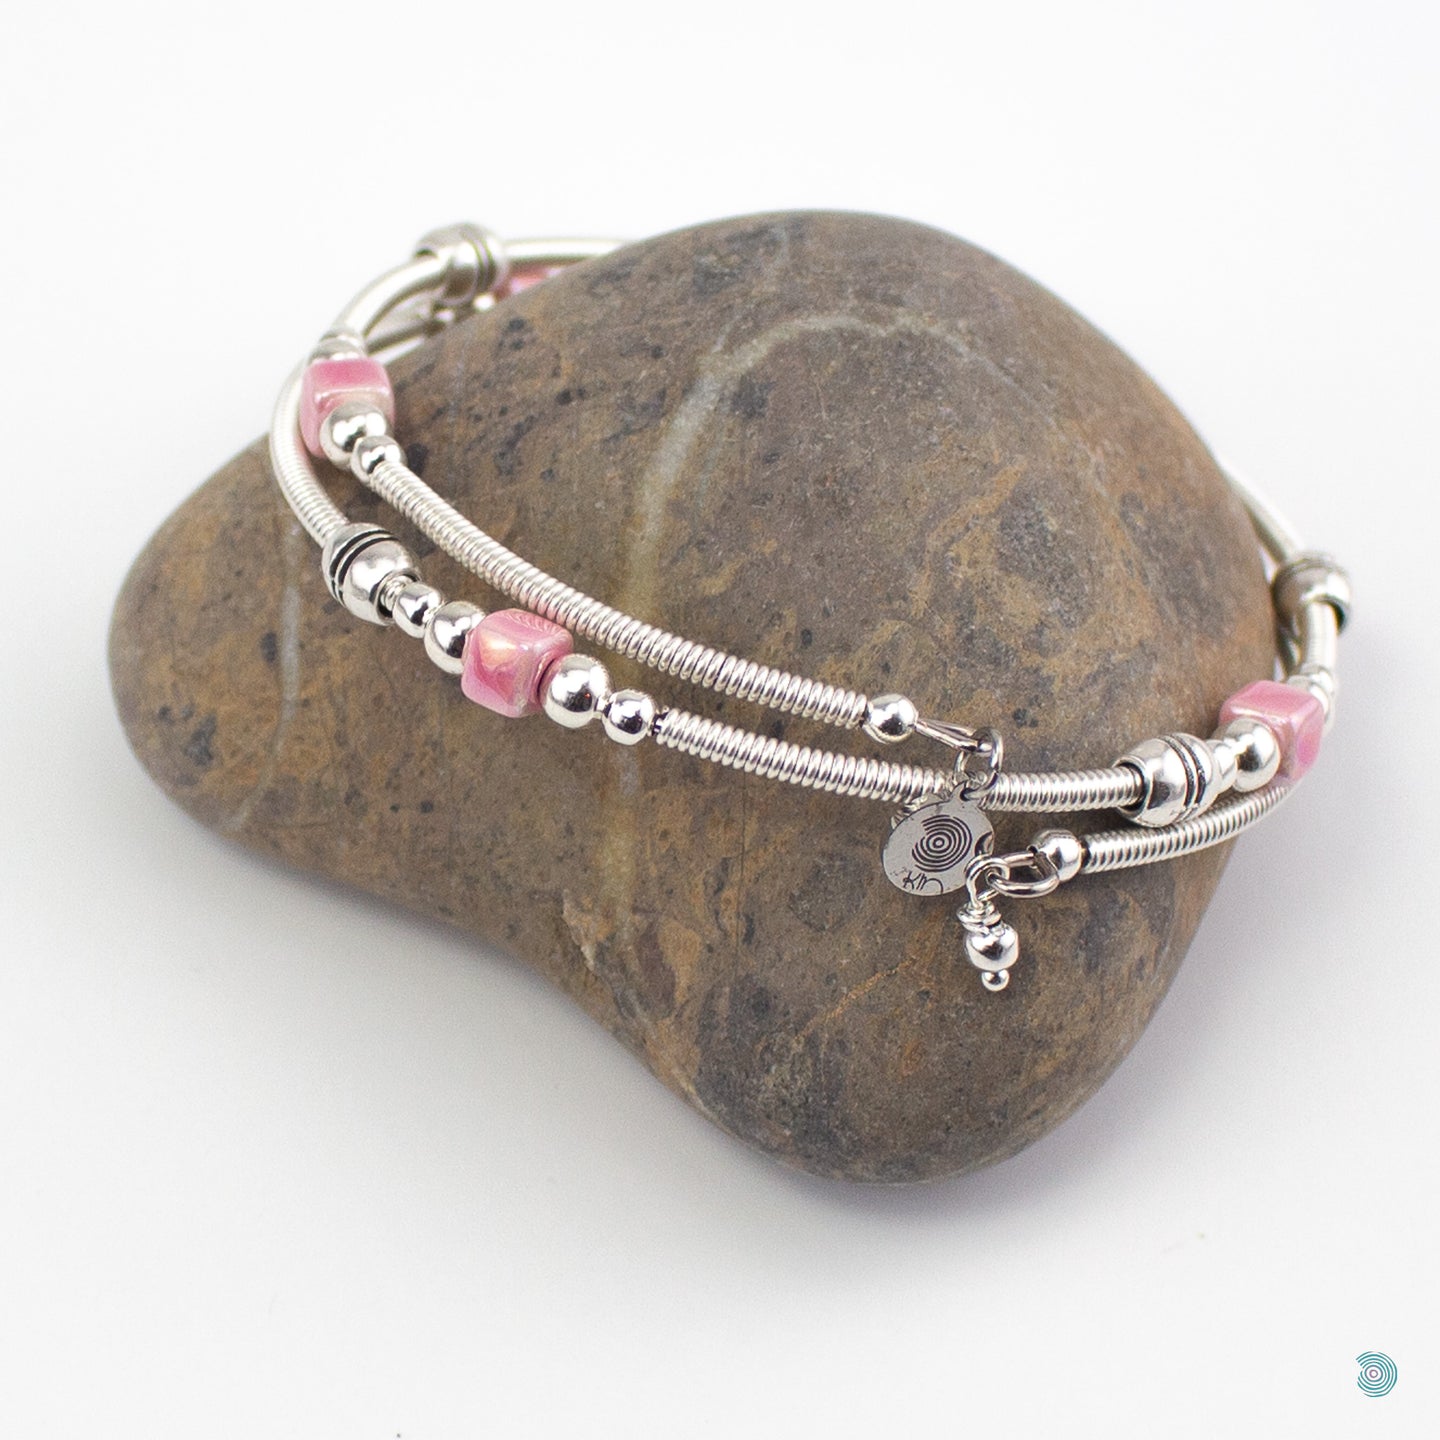 Hand wrapped silver filled wrap around bracelet, pink ceramic cubes and silver bead detail. Approximate diameter is 6cm and is flexible to fit most wrist sizes. This bracelet has no clasp is simply wraps around the wrist and sits in place. Designed and Handmade in Dingle, Ireland. KellyMarie Jewellery Design